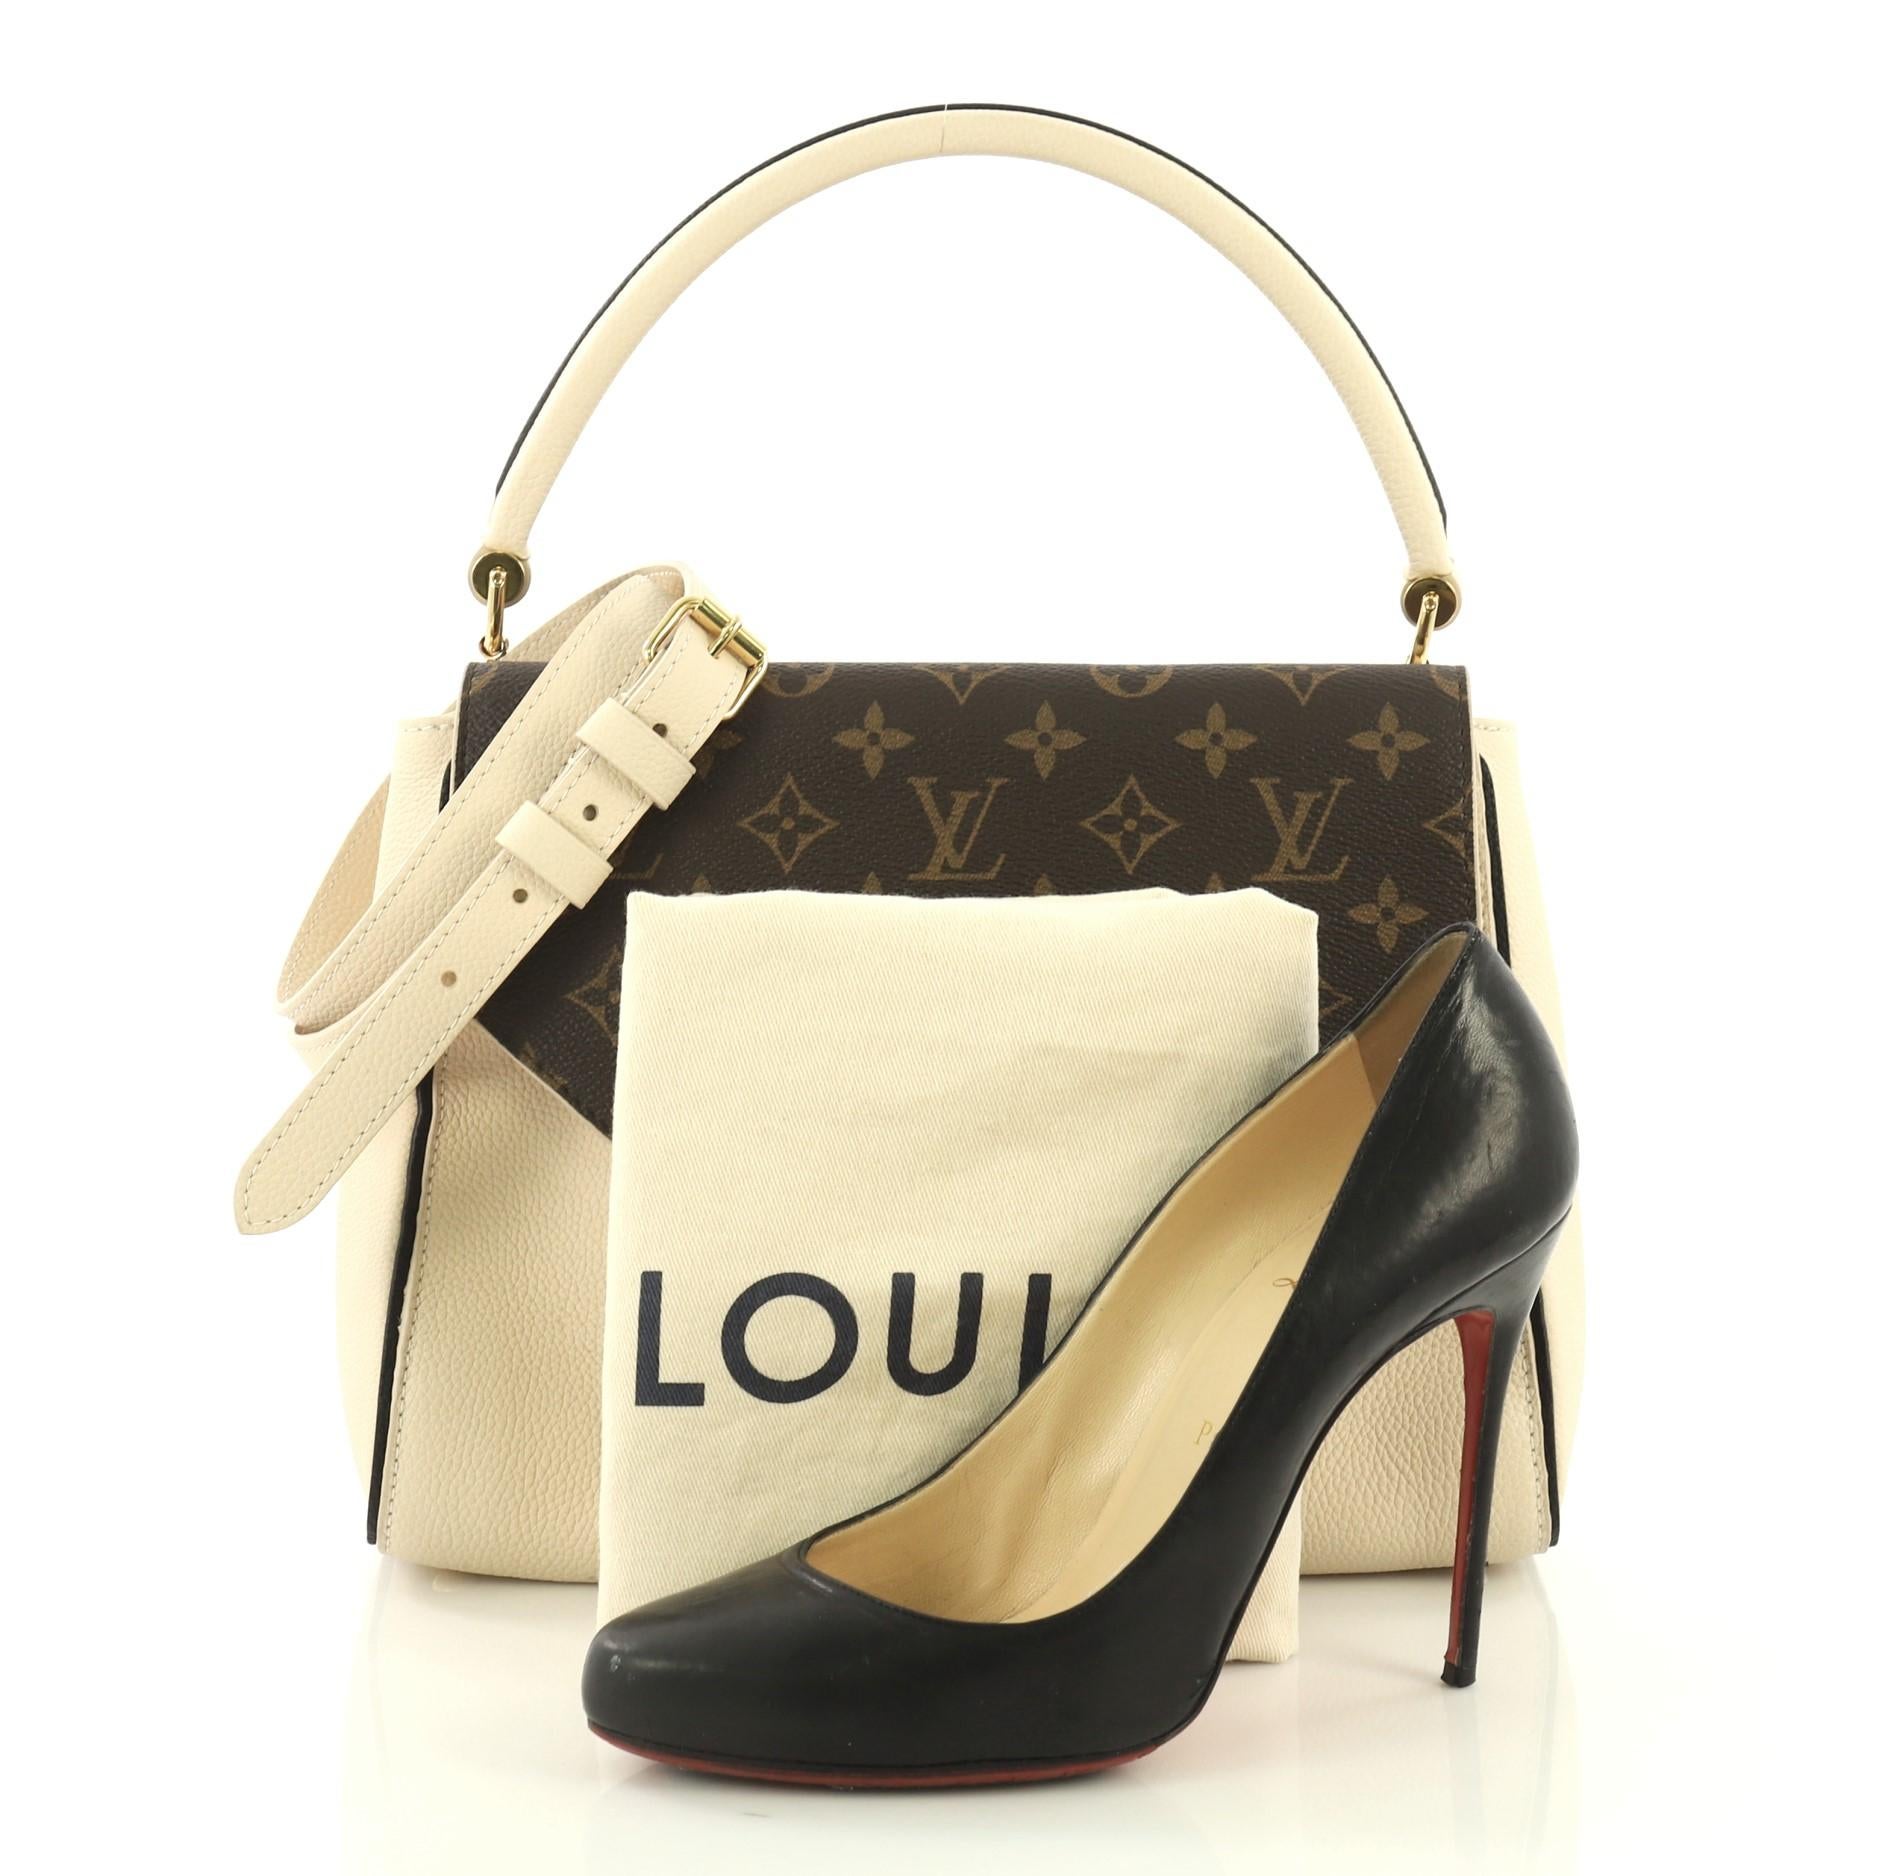 This Louis Vuitton Double V Handbag Calfskin and Monogram Canvas, crafted in cream calfskin and brown monogram coated canvas, features a rolled top handle, exterior back pocket, two V flaps, and gold-tone hardware. Its magnetic snap button closure